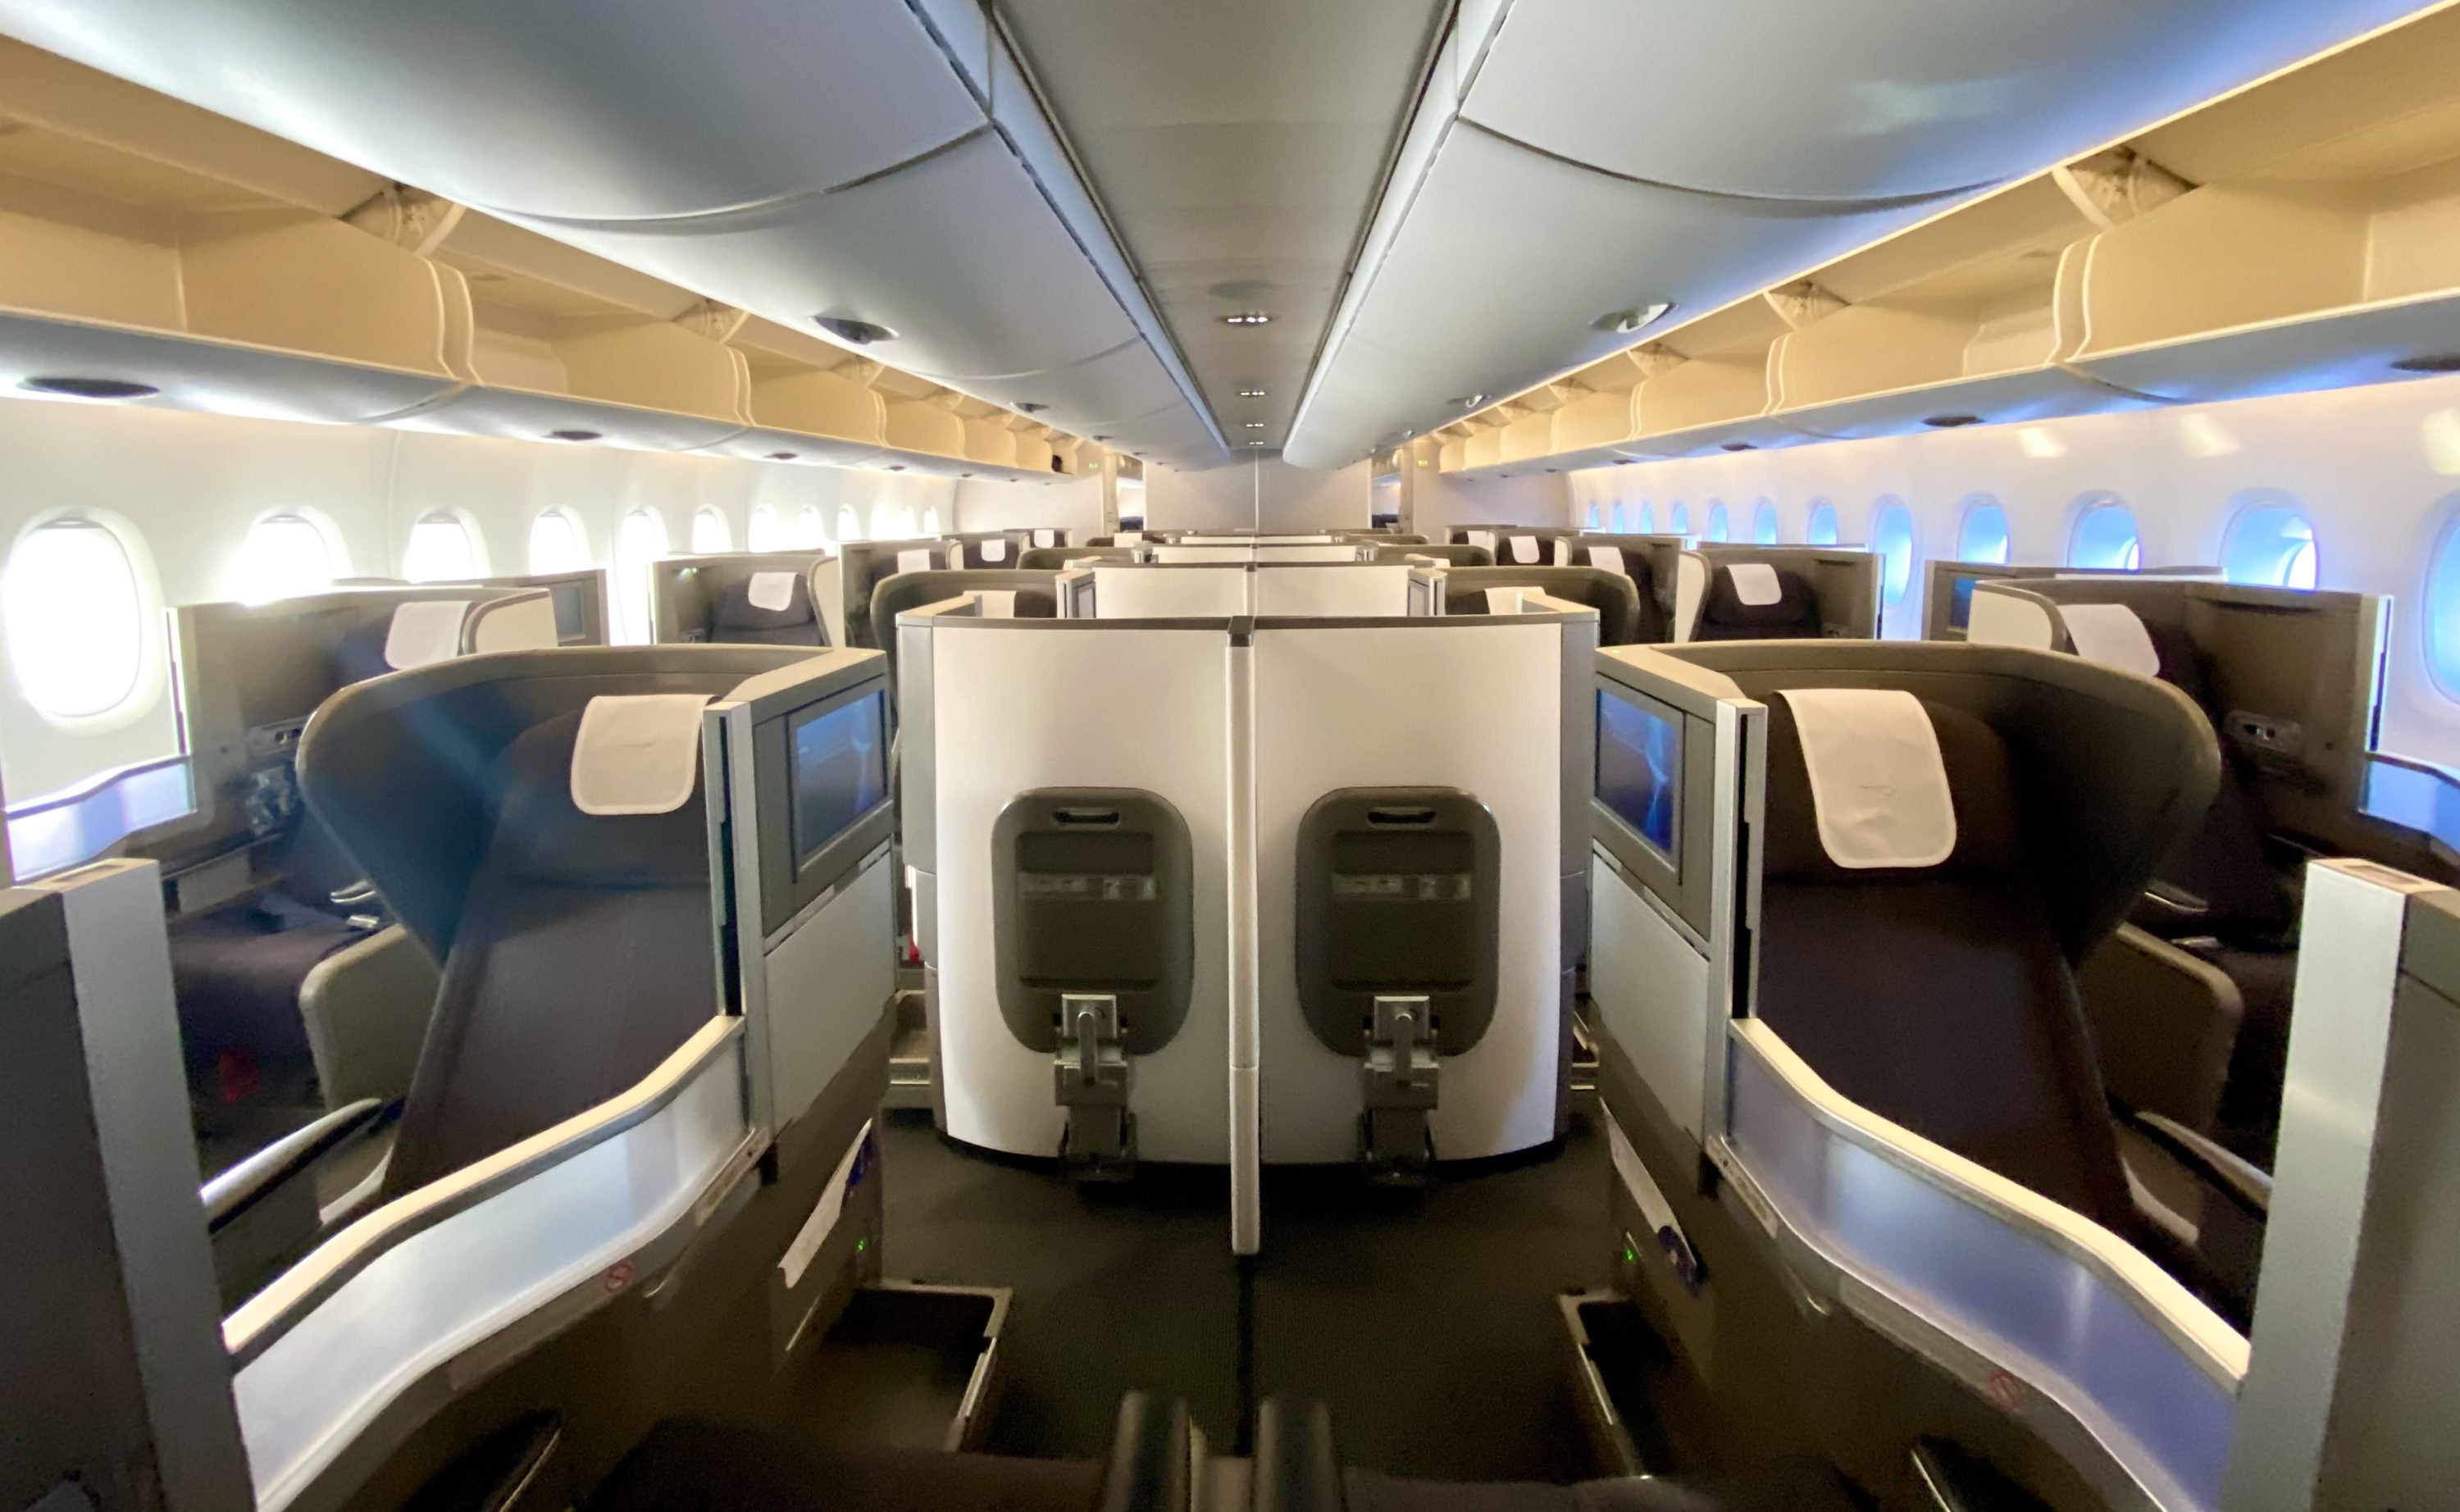 British Airways Club Europe A380 Club World lower deck cabin from the front